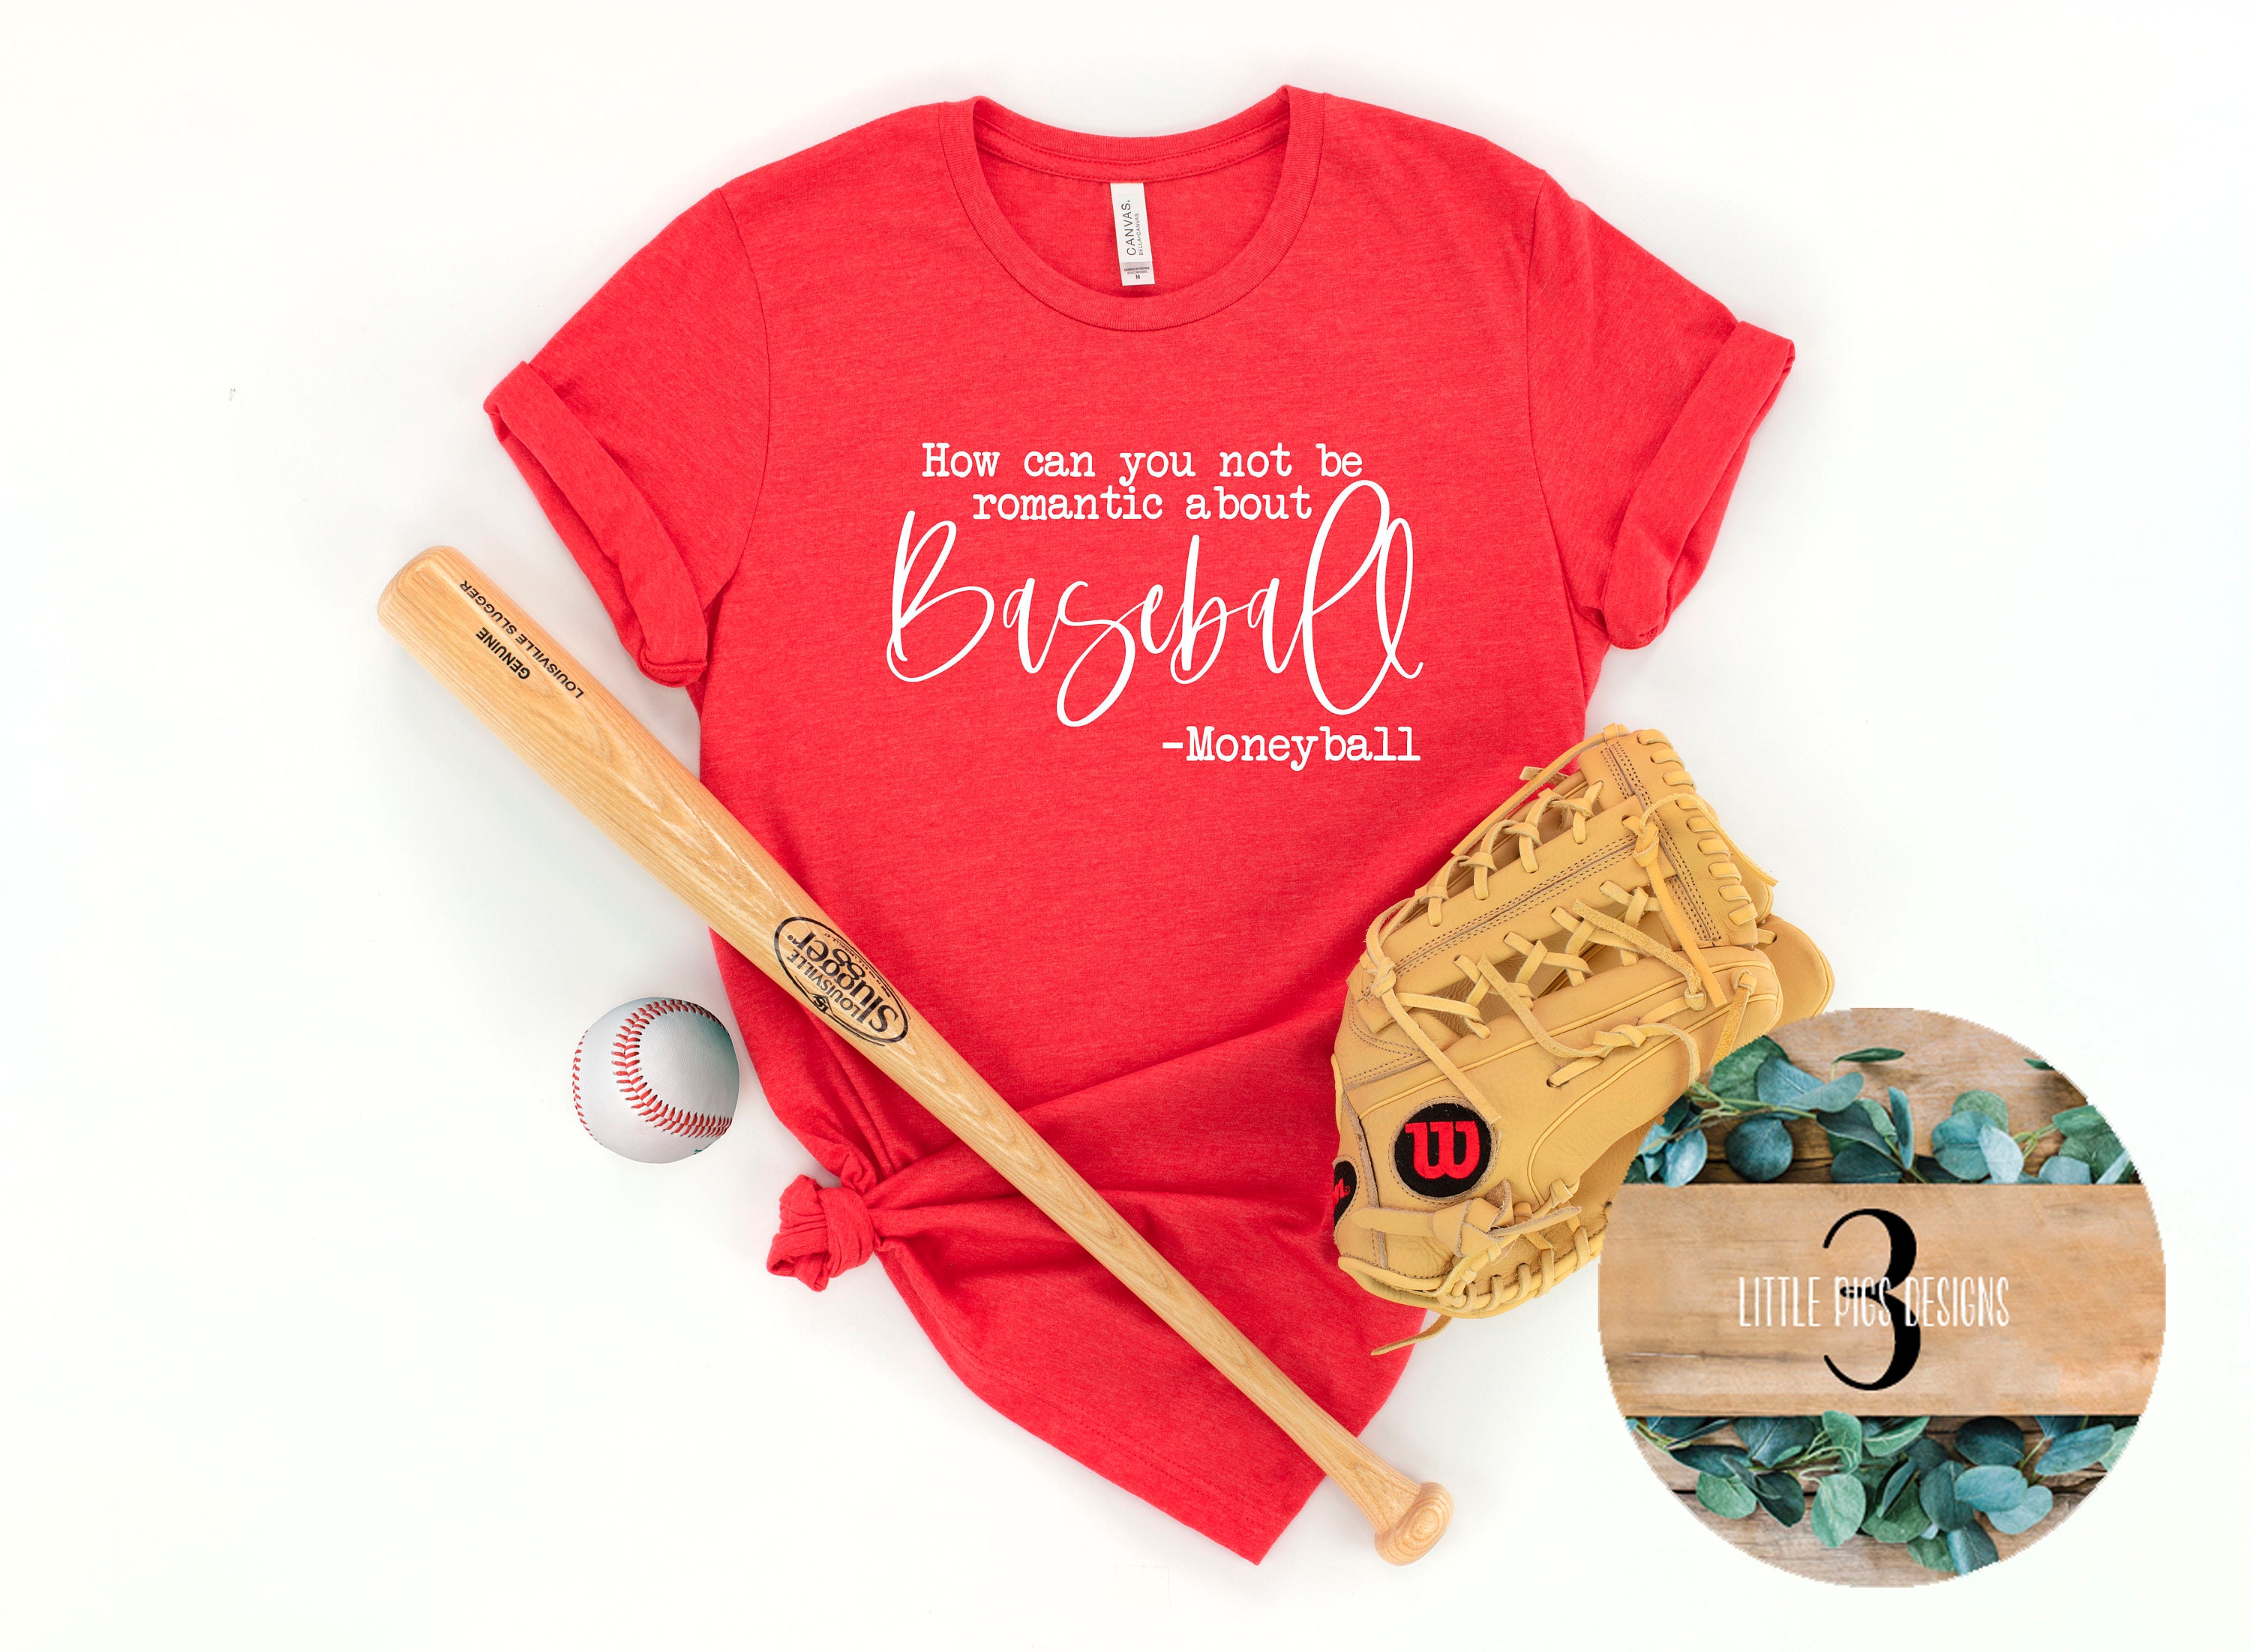 Louisville Languages Red T-Shirt with Short Sleeves - GOEX - Just Creations